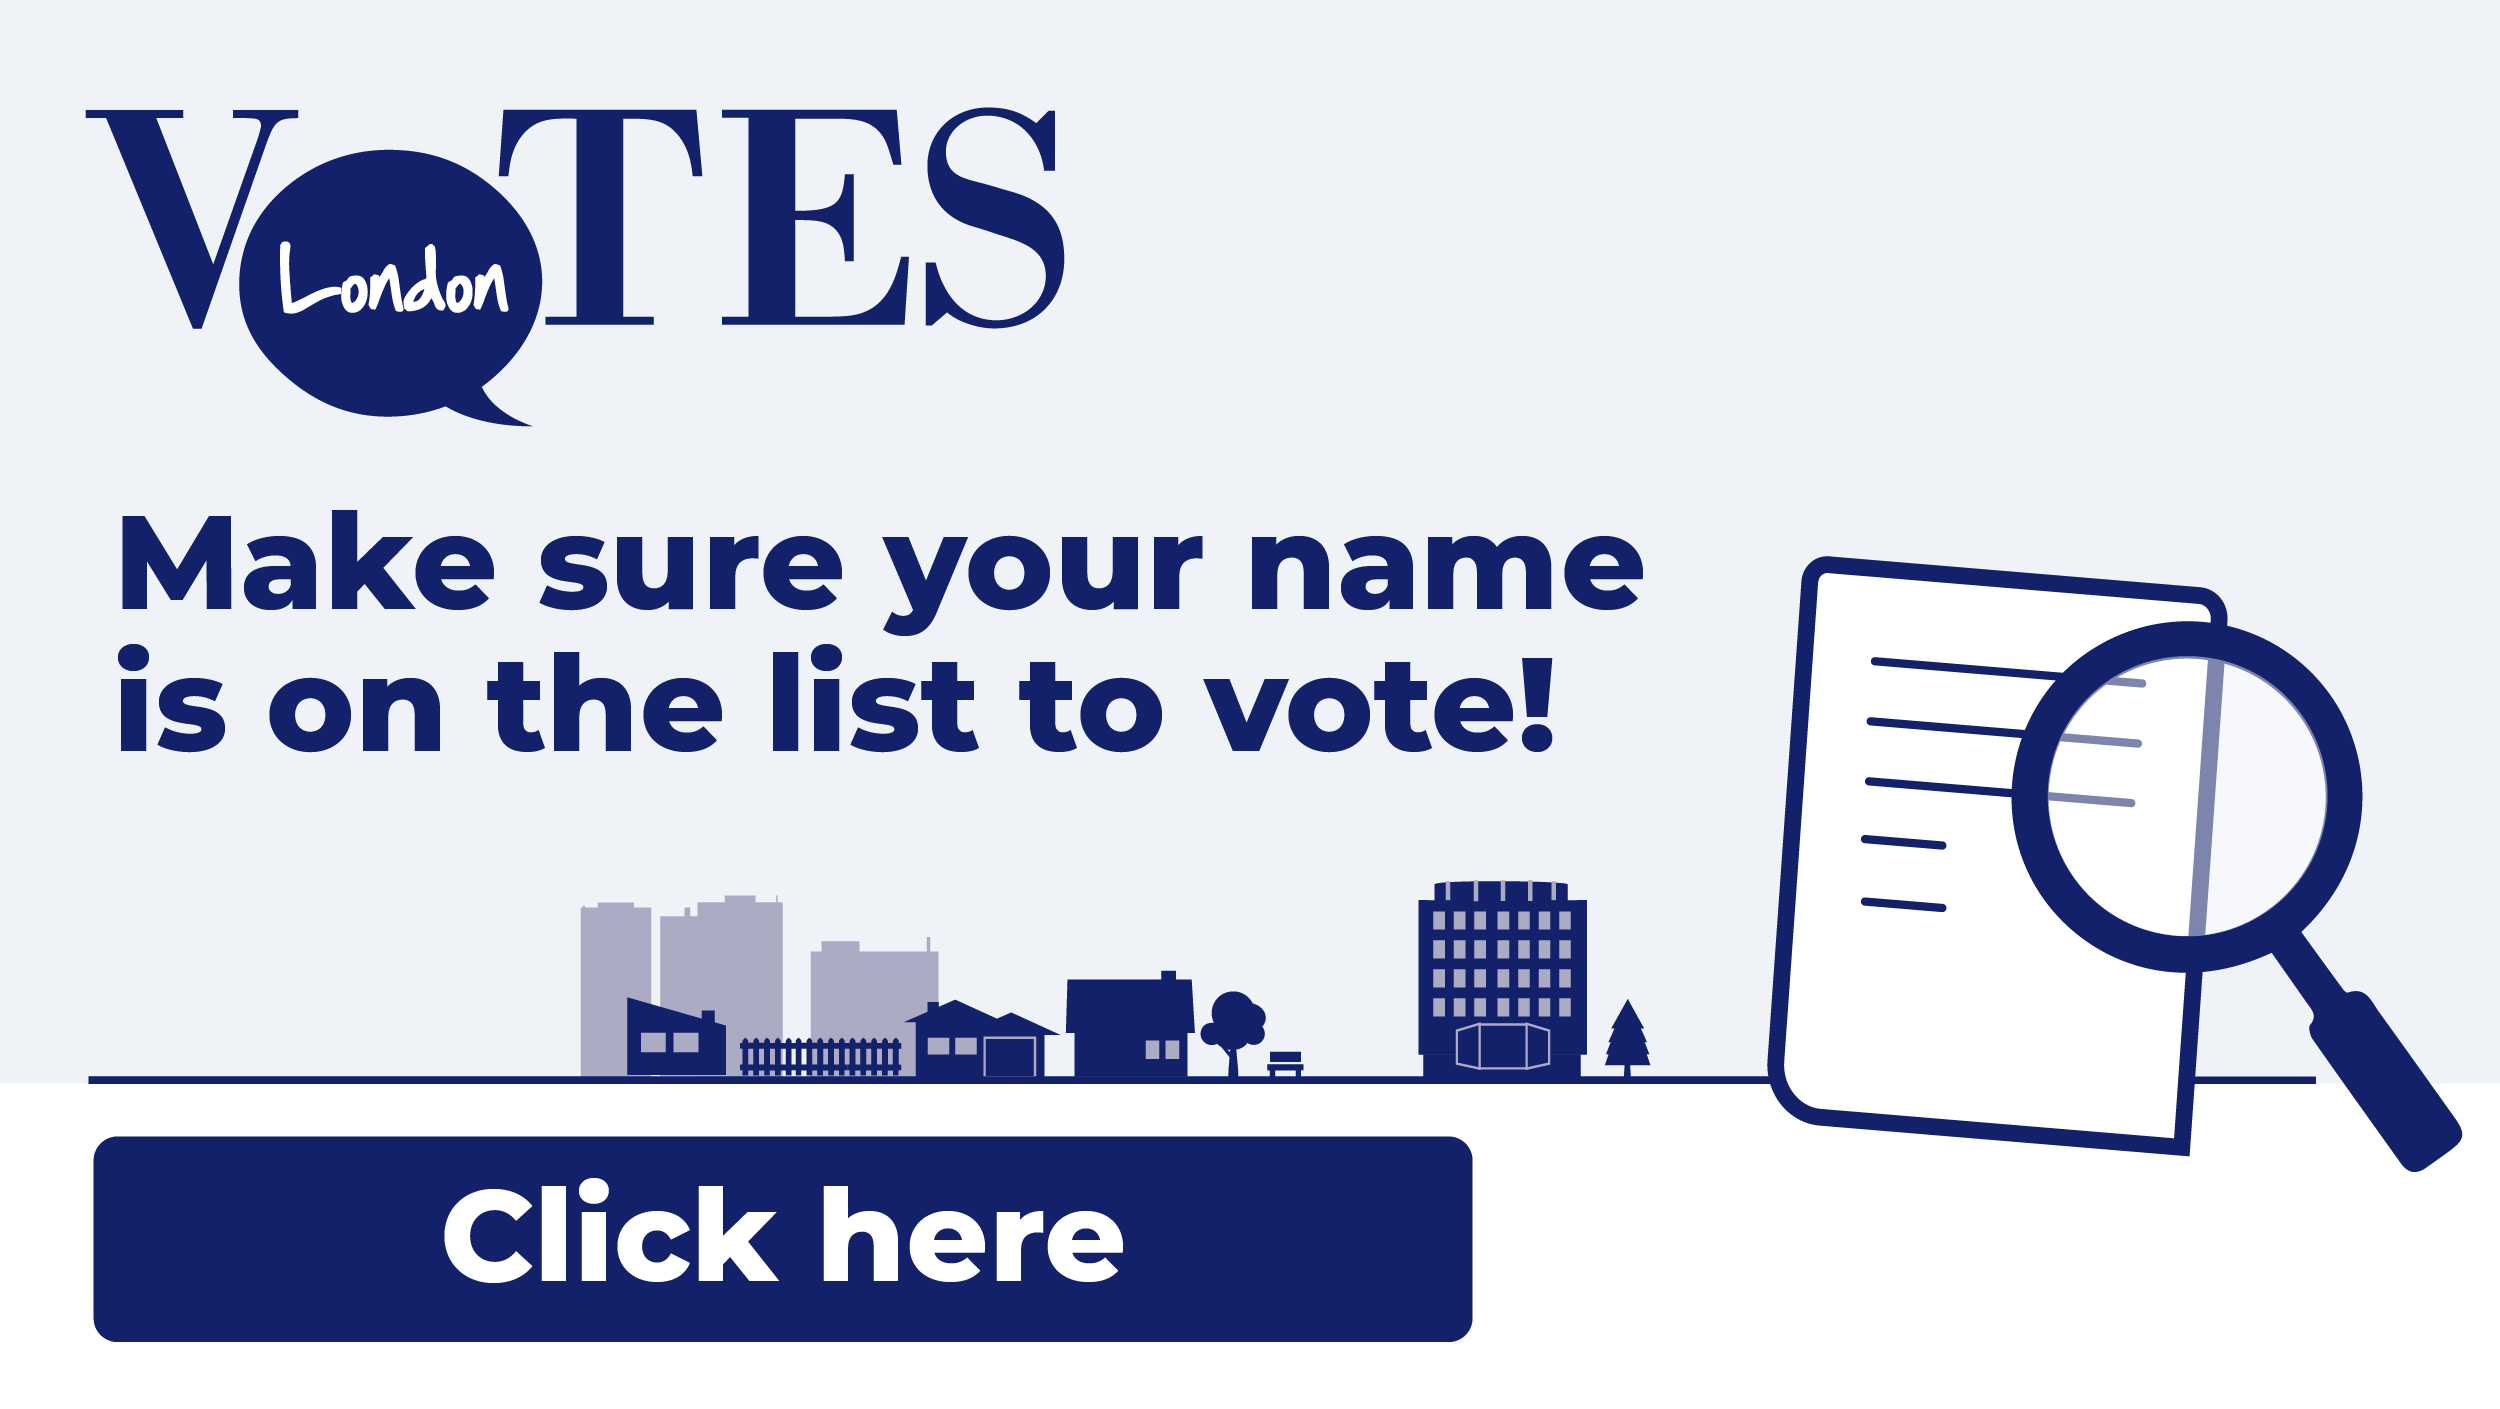 Make sure your name is on the list to vote button